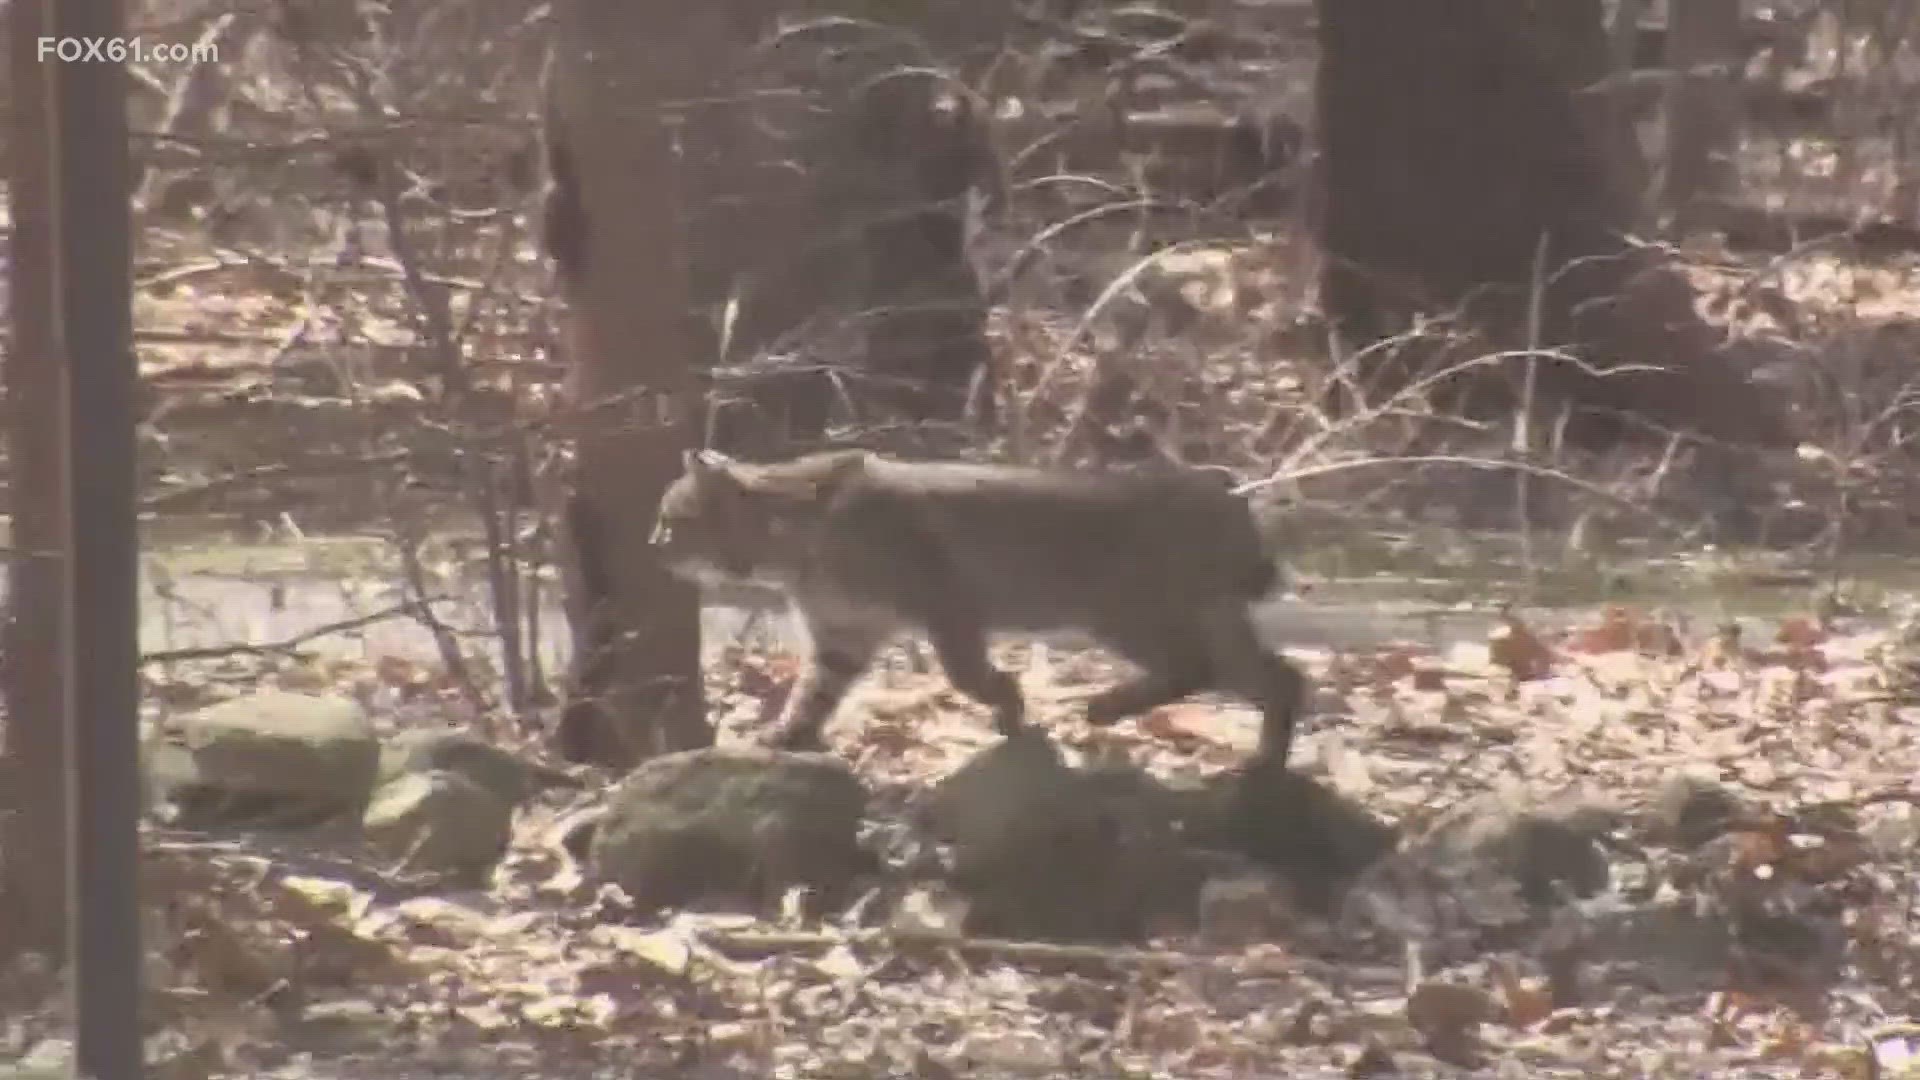 The bobcat has been taken to the State Public Health laboratory for rabies testing.